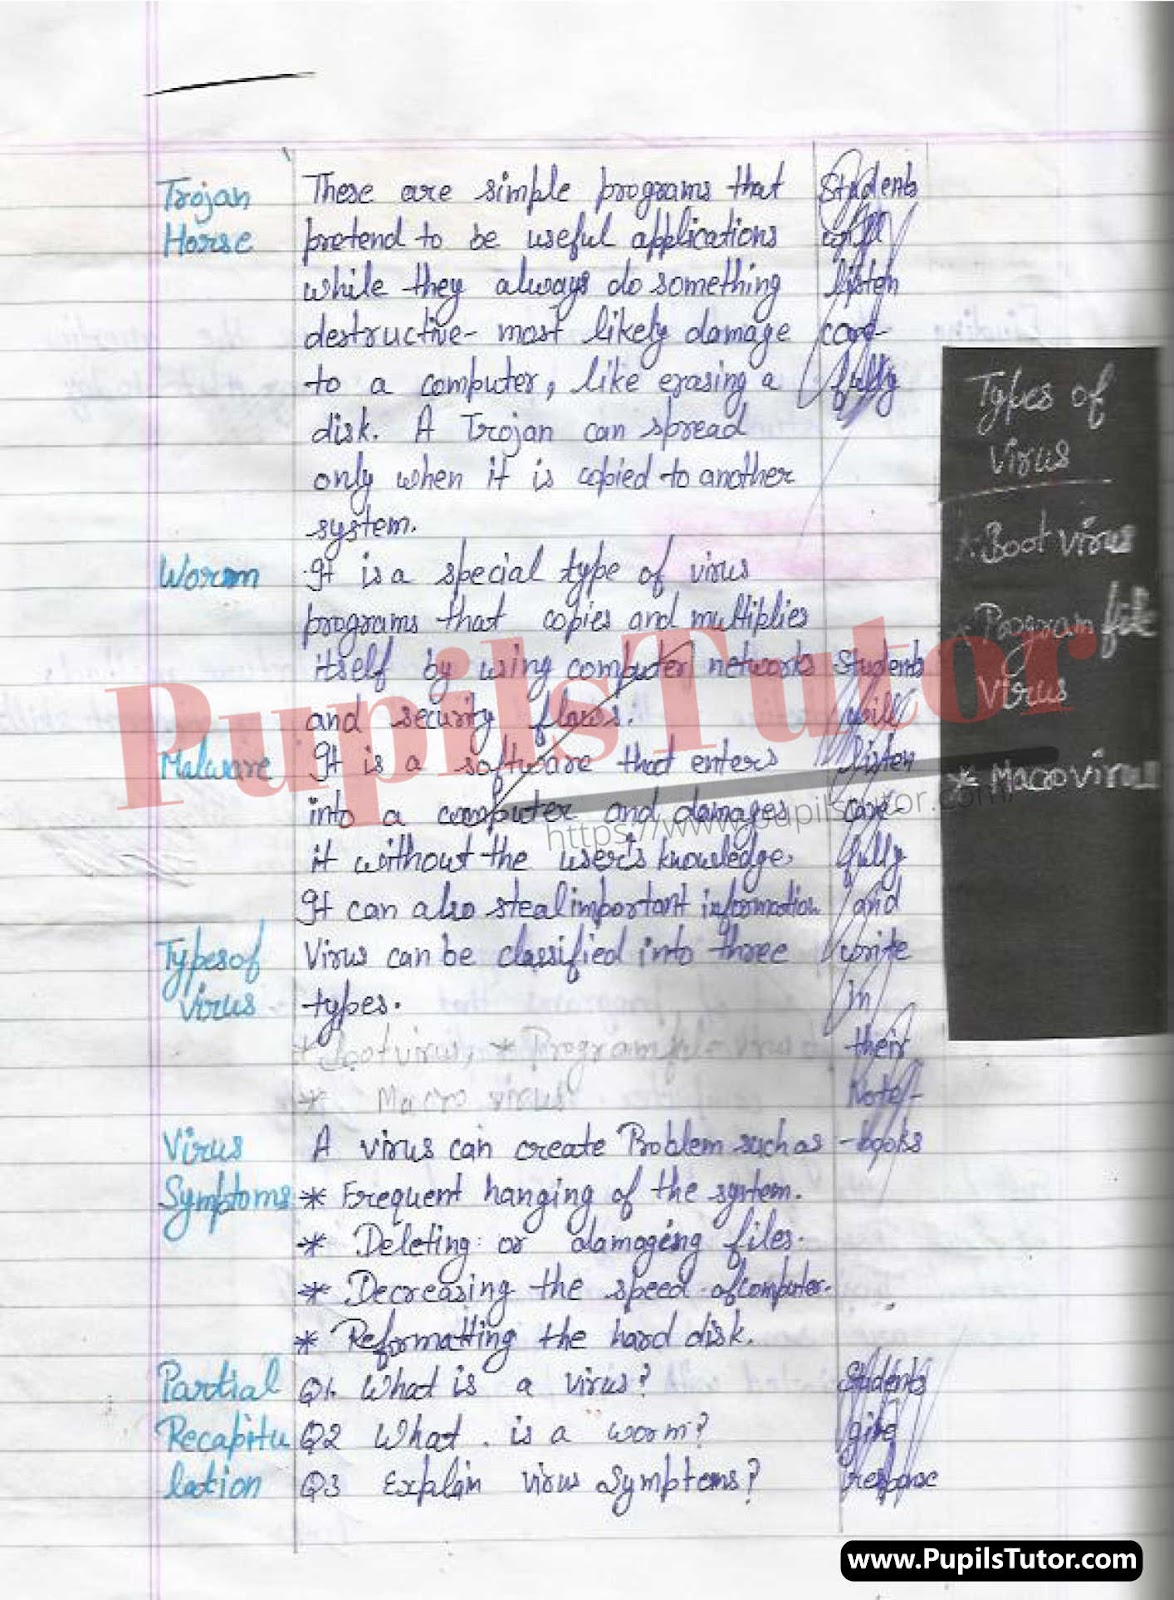 BED, DELED, BTC, BSTC, M.ED, DED And NIOS Teaching Of Computer Science Innovative Digital Lesson Plan Format On Virus And Malwares Topic For Class 4th 5th 6th 7th 8th 9th, 10th, 11th, 12th  – [Page And Photo 4] – pupilstutor.com